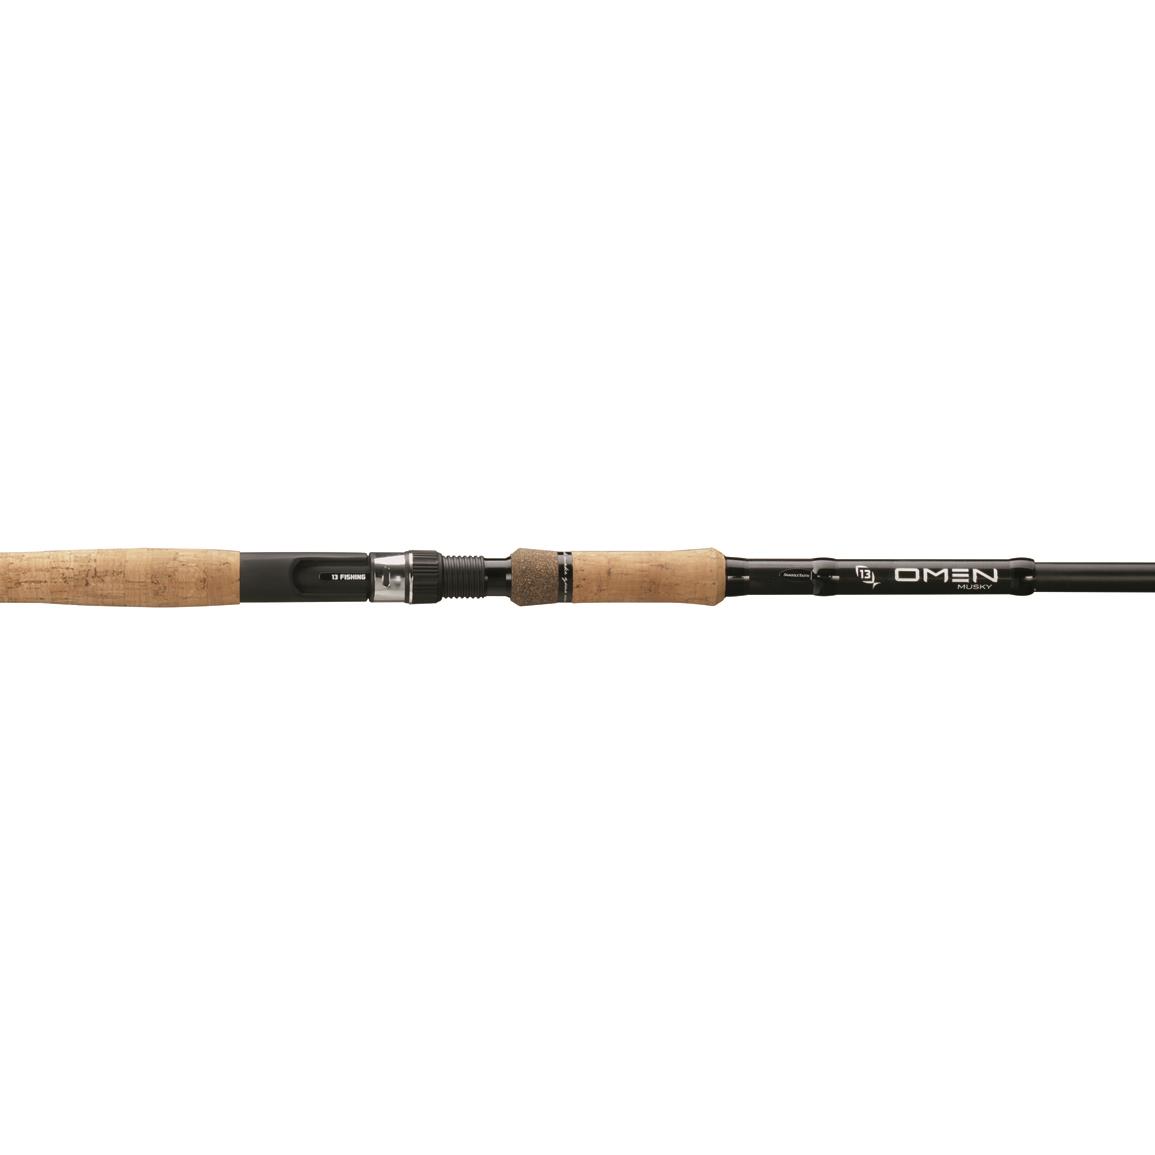 St. Croix Premier Musky Rod, 8'6 Length, Medium Heavy Power, Fast Action -  721623, Casting Rods at Sportsman's Guide